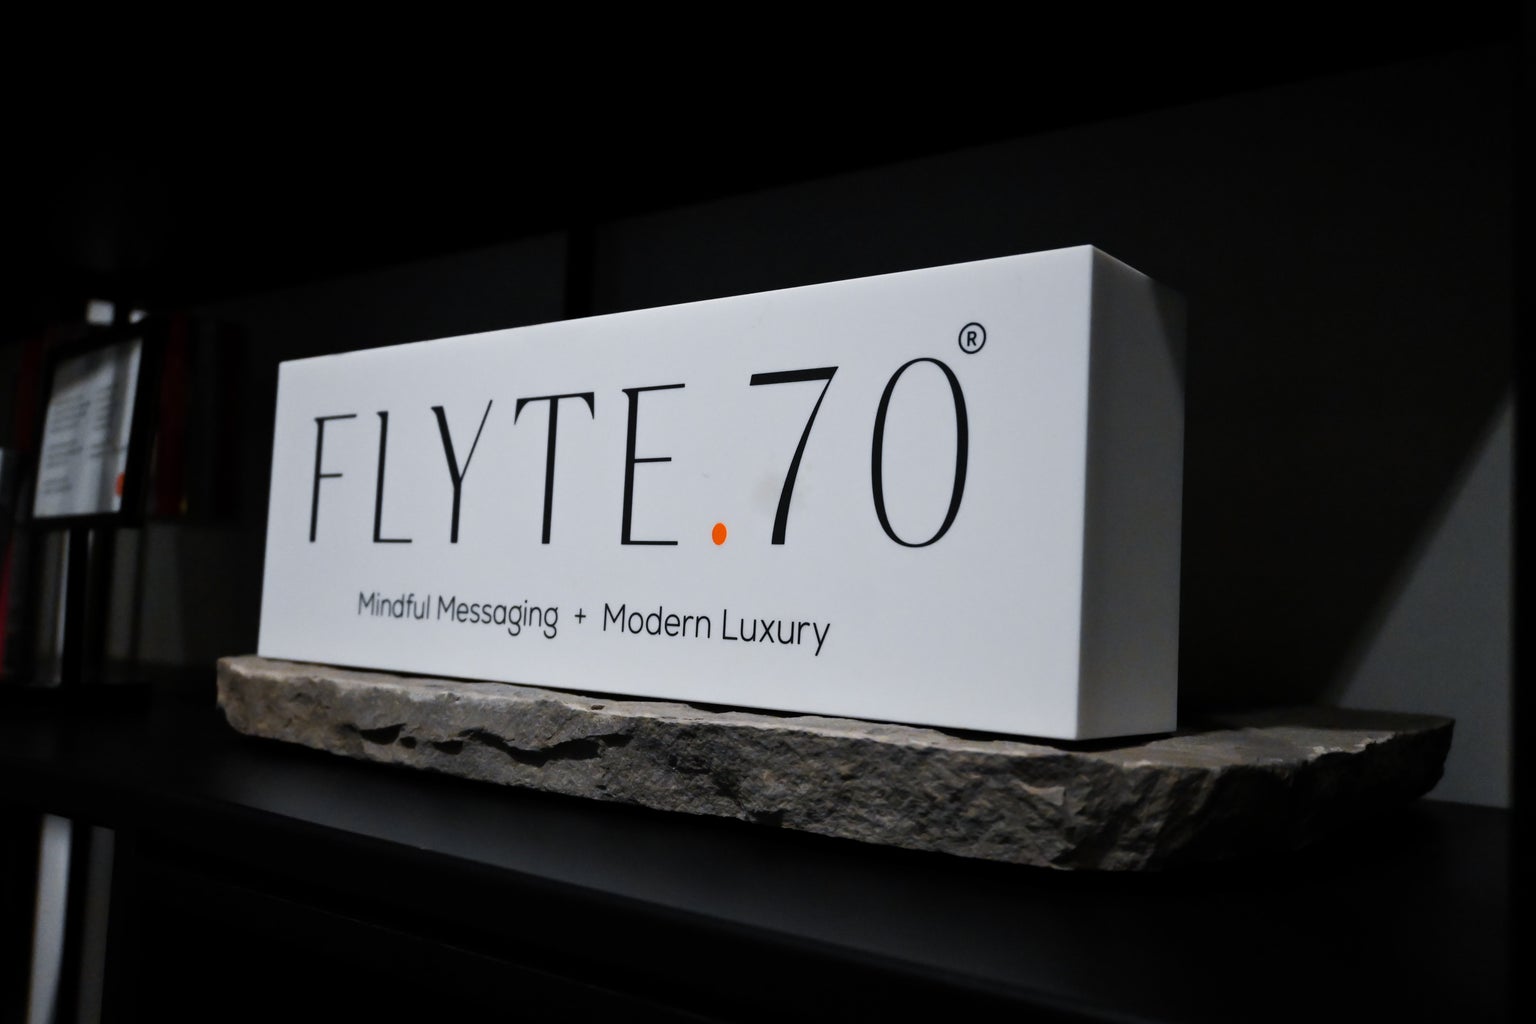 Flyte.70 is located at 555 Washington St. in Wellesley.